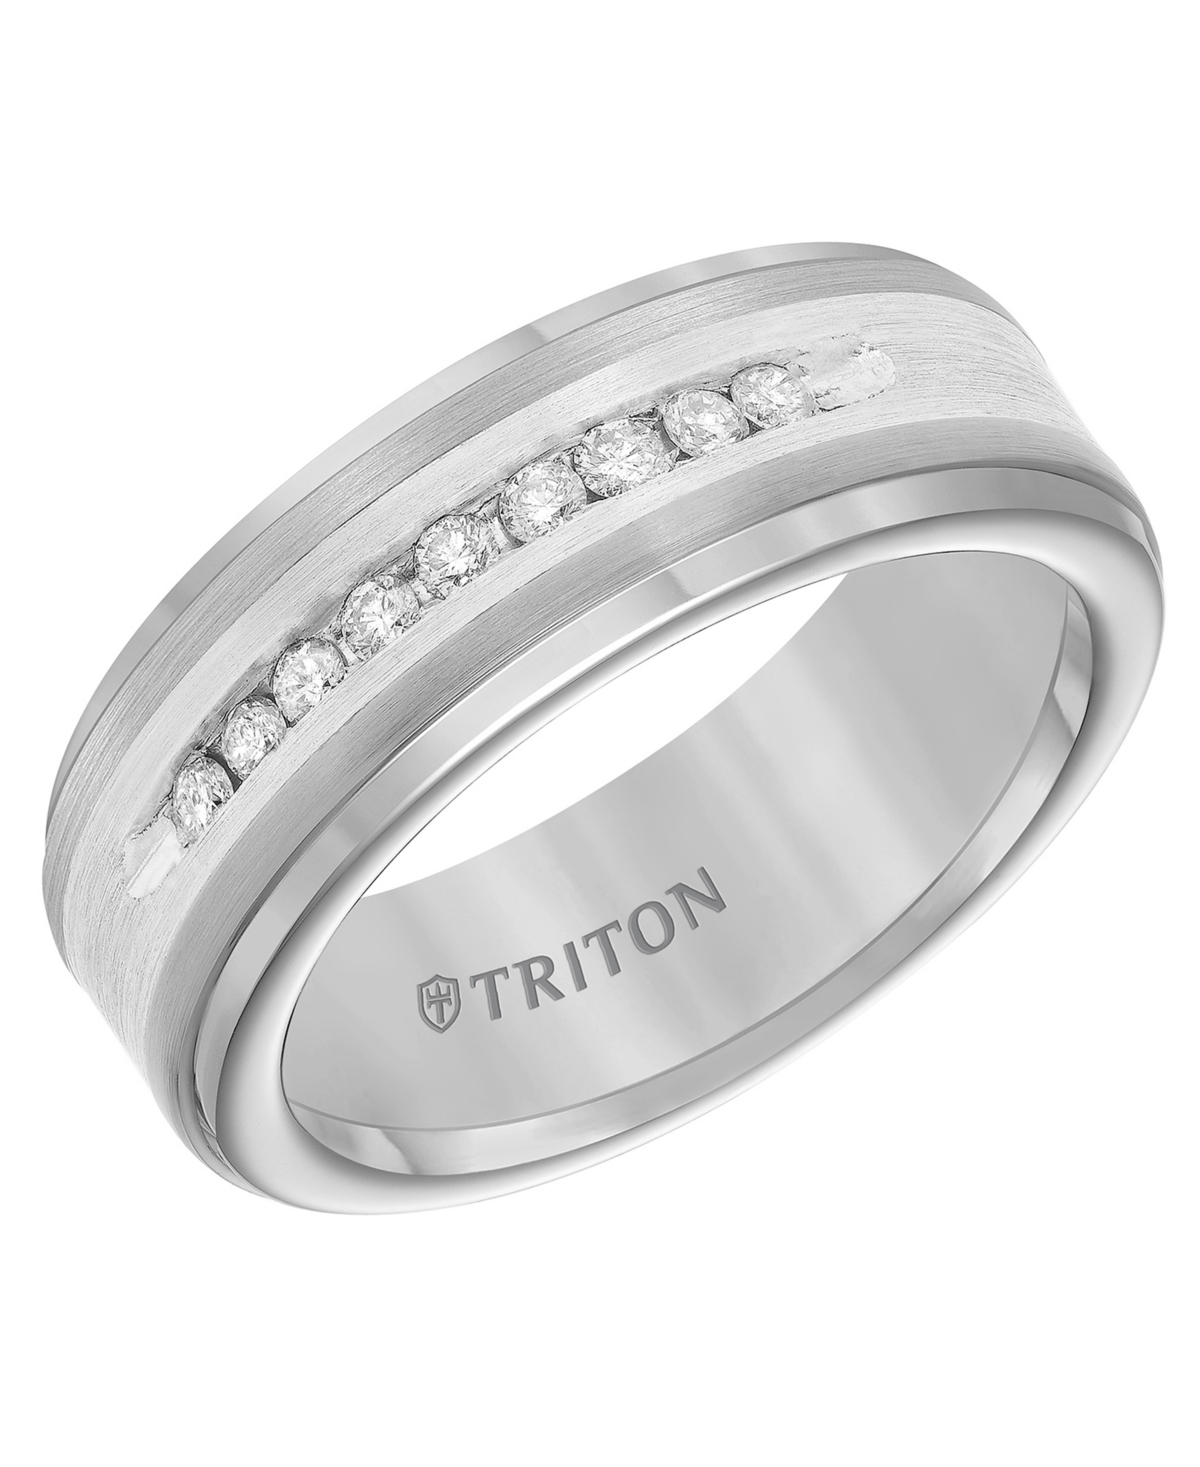 Men's Diamond Satin Finish Comfort Fit Wedding Band (1/4 ct. t.w.) in Tungsten Carbide & Sterling Silver - Sterling Silver